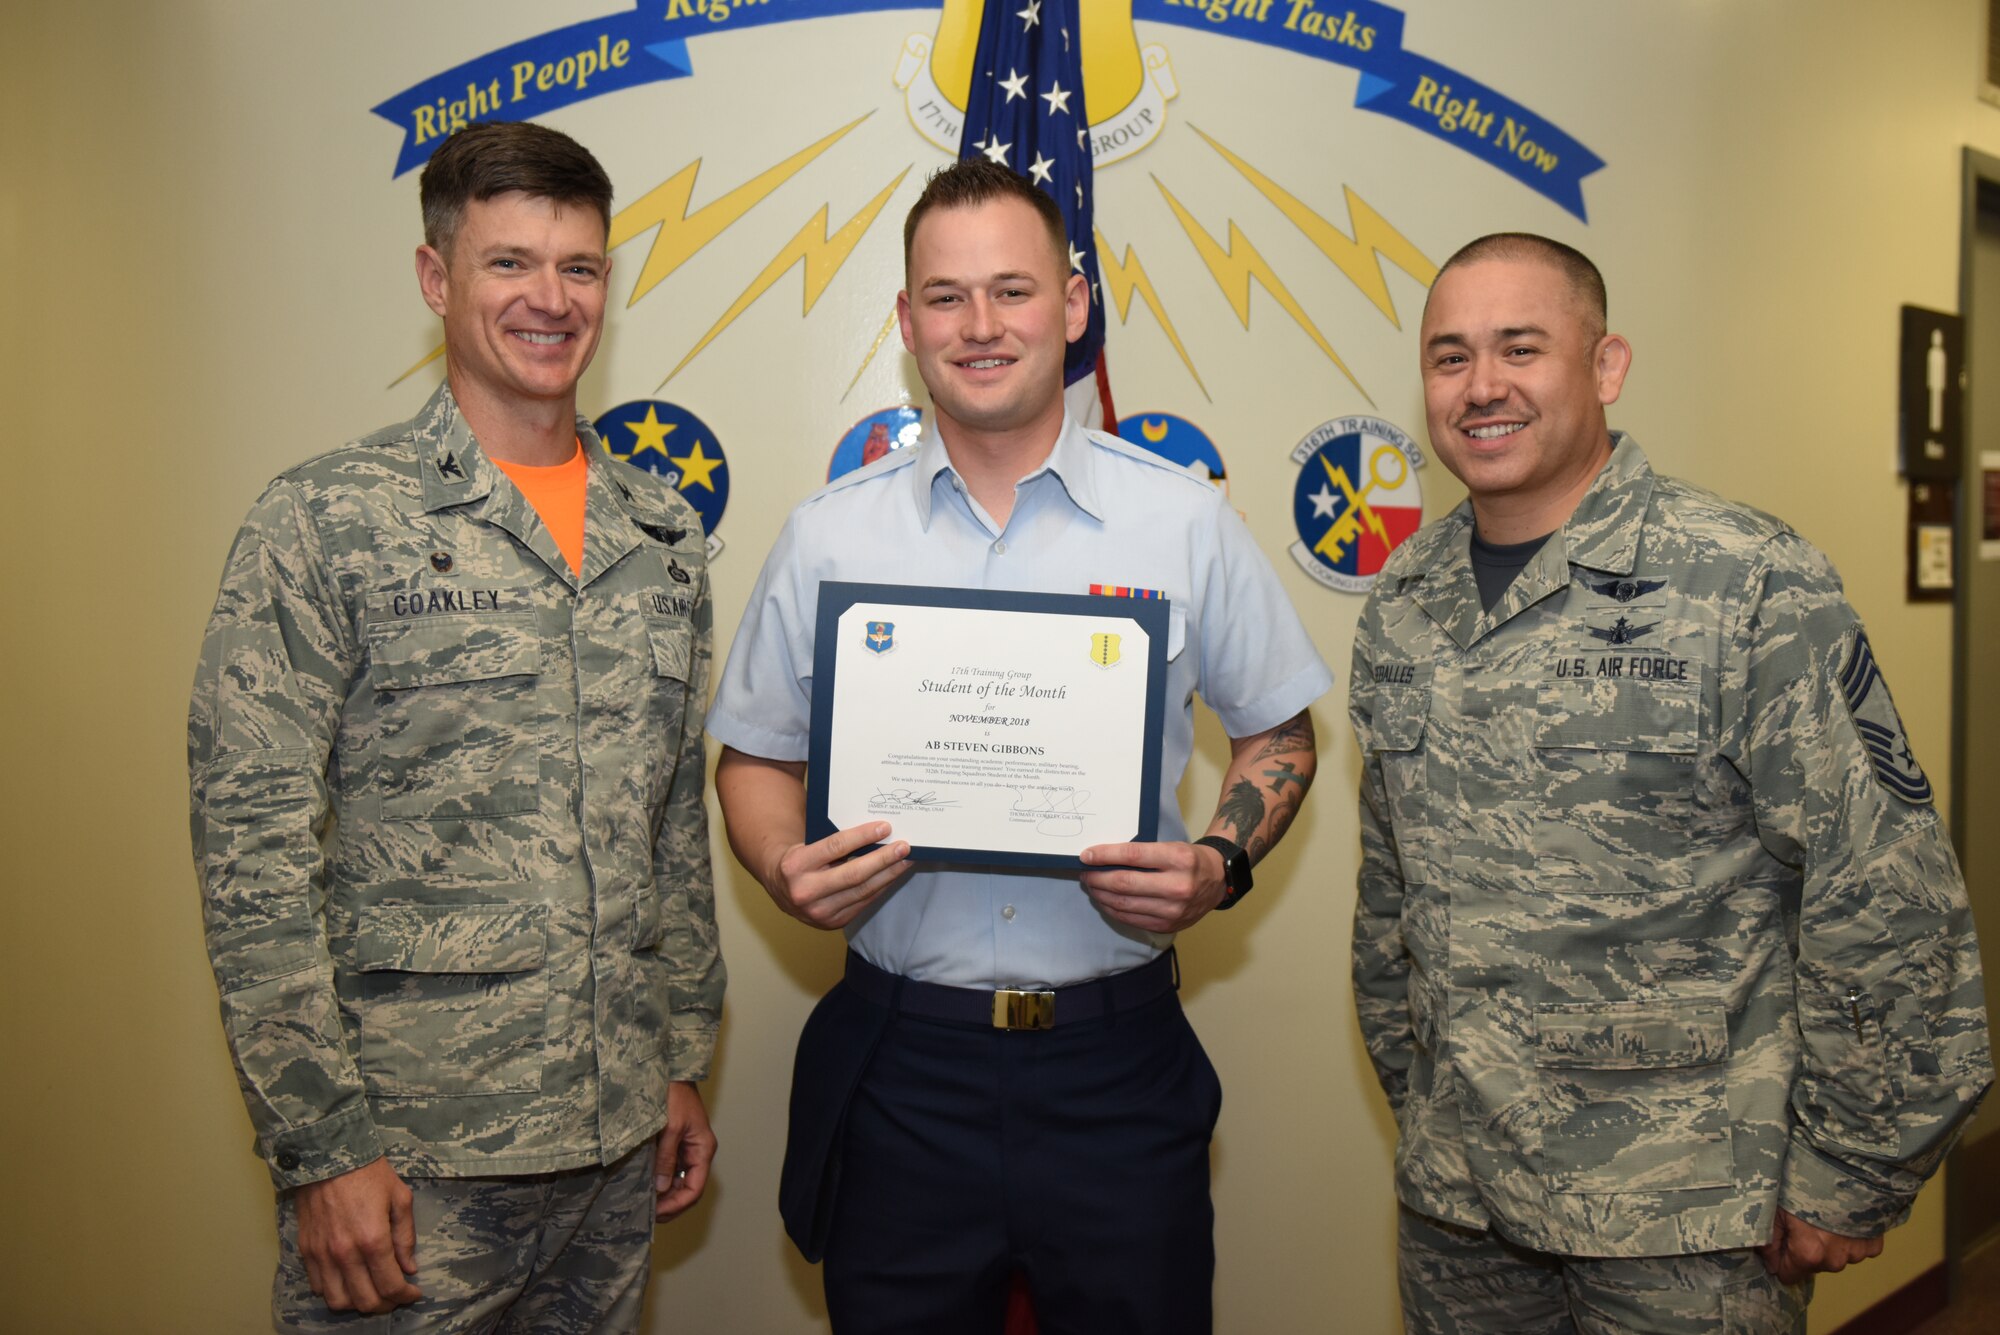 U.S. Air Force Col. Thomas Coakley, 17th Training Group commander, presents the 312th Training Squadron Student of the Month award to Airman Steven Gibbons, 312th TRS student, at Brandenburg Hall on Goodfellow Air Force Base, Texas, Dec. 7, 2018. The 312th TRS’s mission is to provide Department of Defense and international customers with mission ready fire protection and special instruments graduates and provide mission support for the Air Force Technical Applications Center. (U.S. Air Force photo by Senior Airman Scott Jackson/Released)